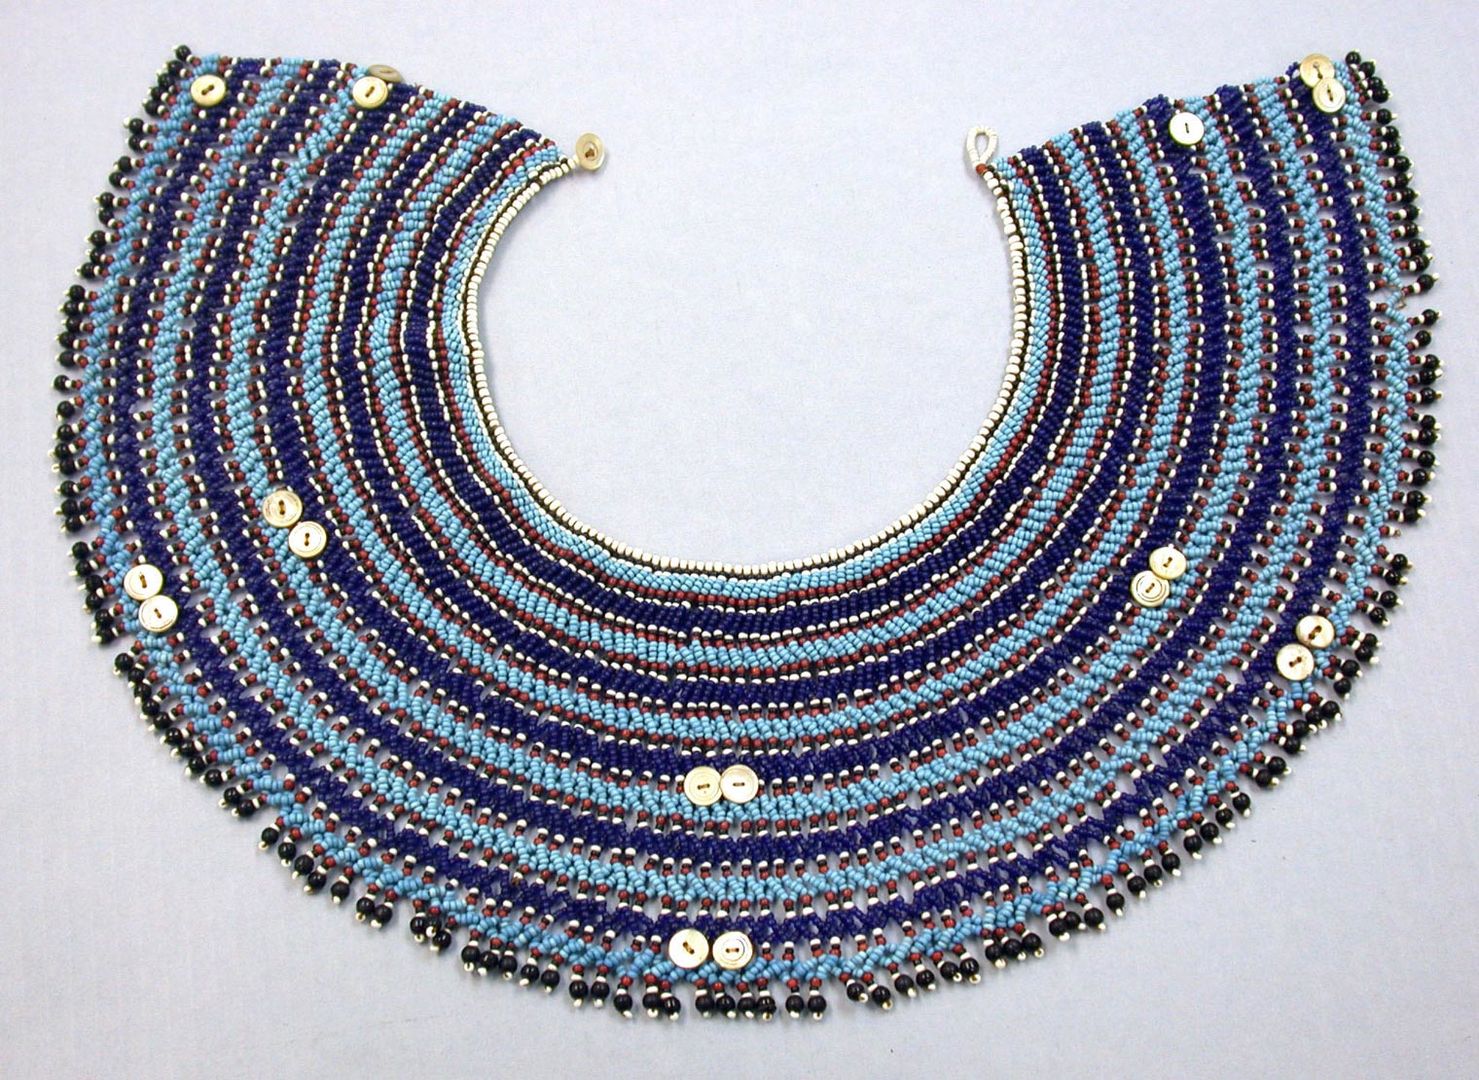 A South African collar made by the Xhosa or Mfengu or Nguni peoples made of beads, fiber, buttons, and leather